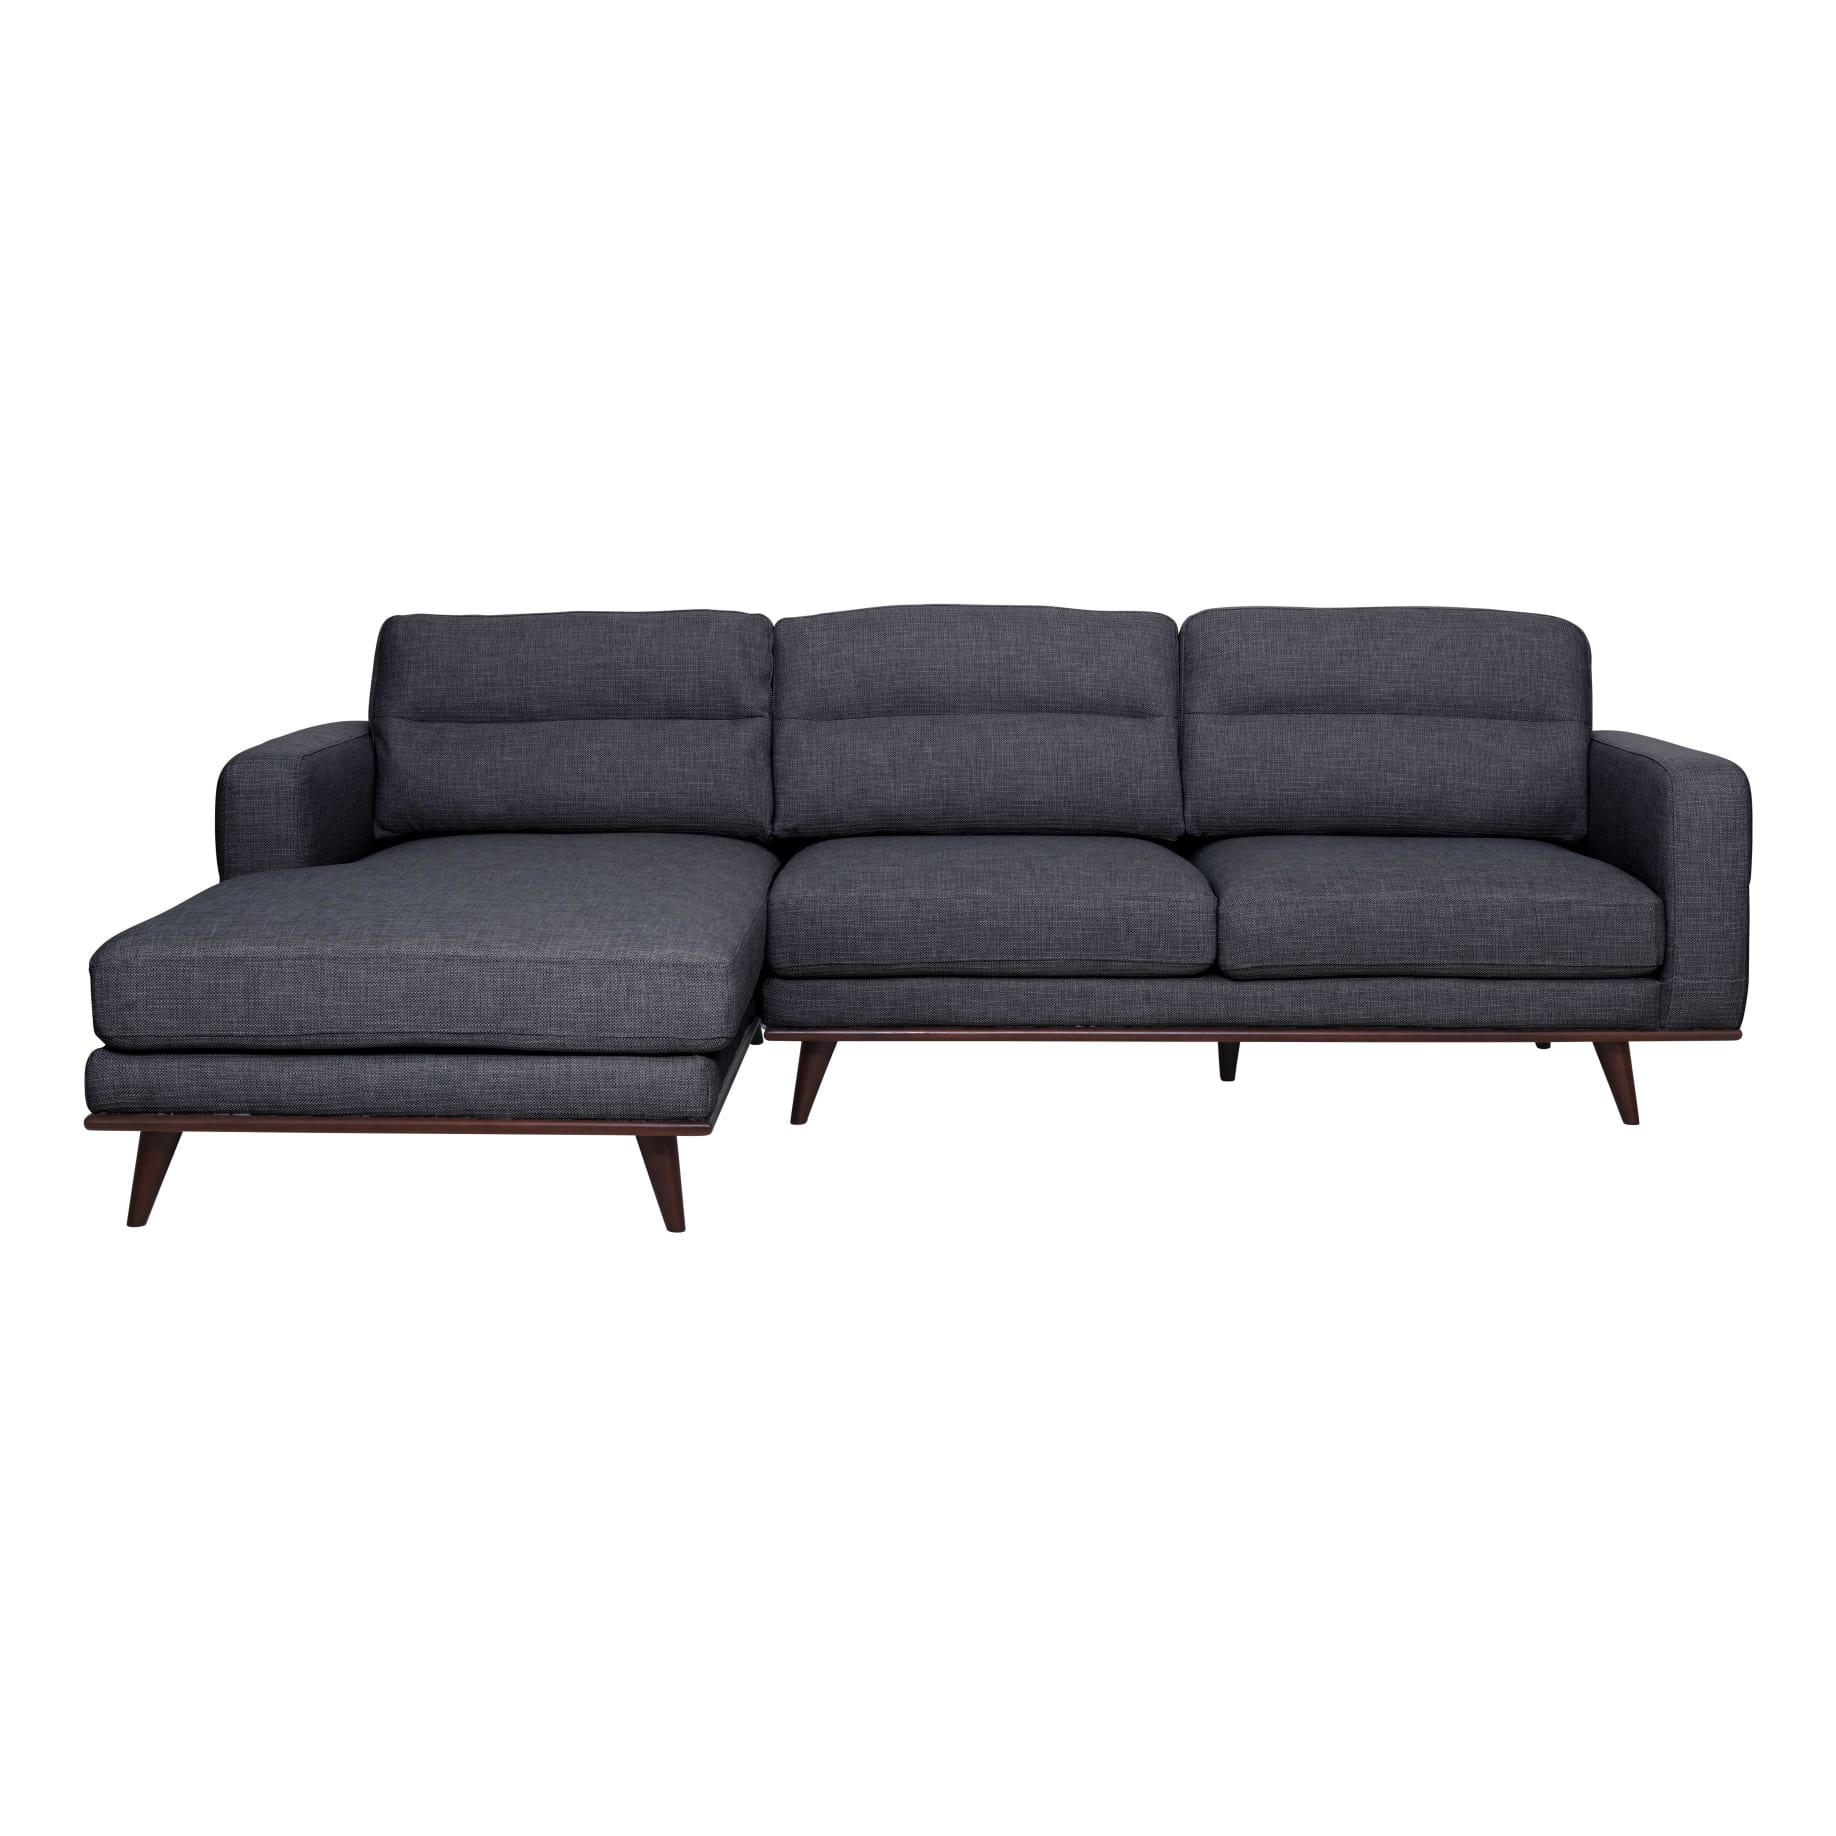 Astrid 2.5 Seater Sofa + Chaise LHF in Talent Charcoal